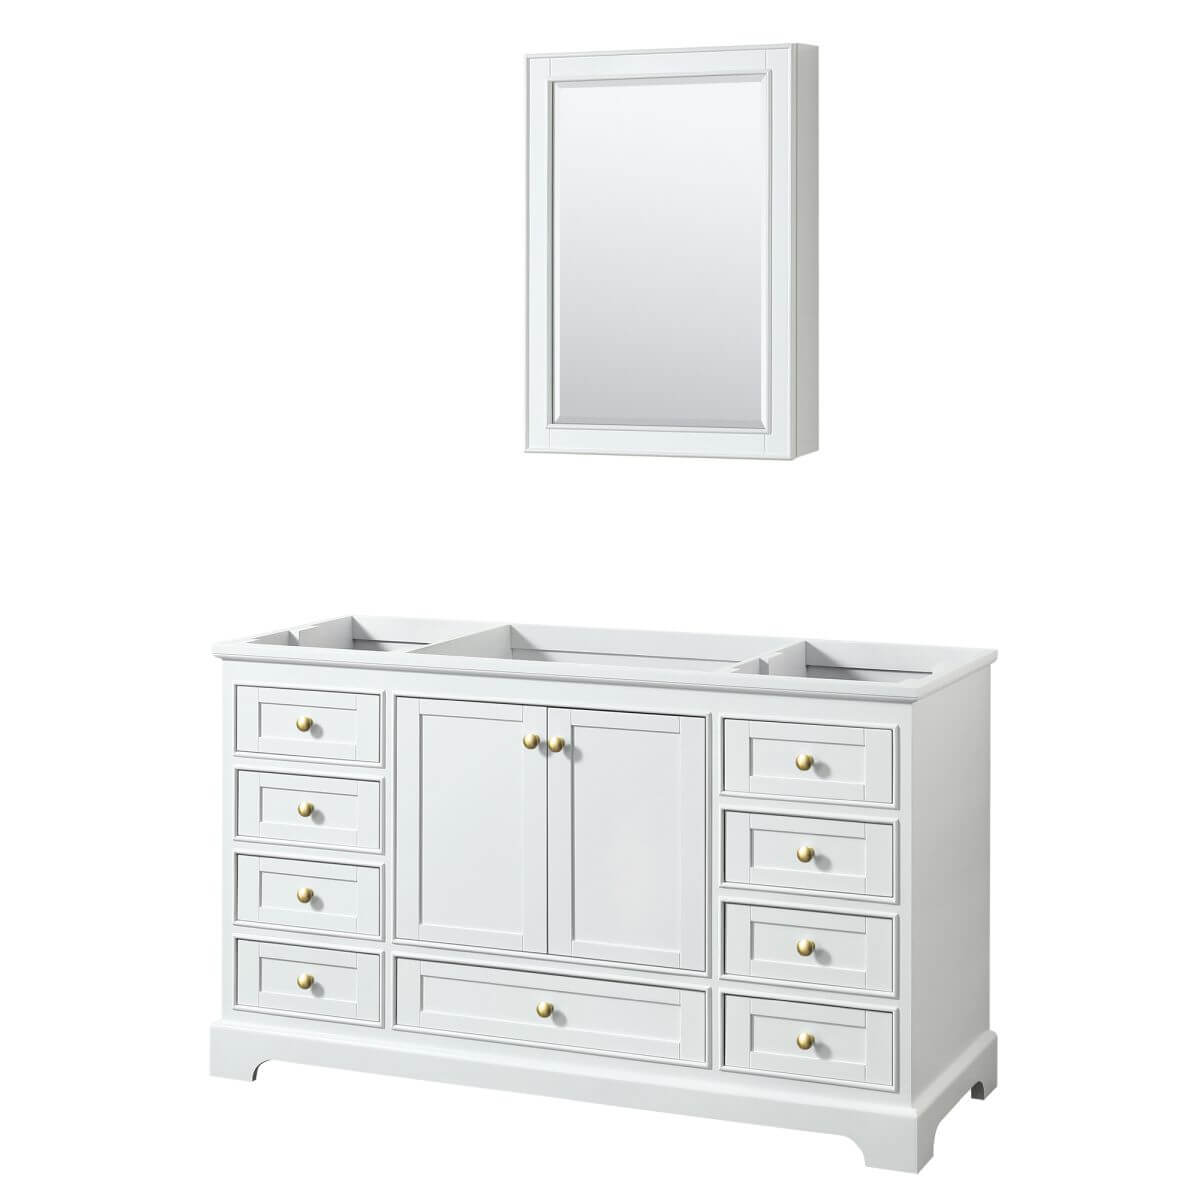 Wyndham Collection Deborah 60 inch Single Bathroom Vanity in White with Medicine Cabinet, Brushed Gold Trim, No Countertop and No Sink - WCS202060SWGCXSXXMED